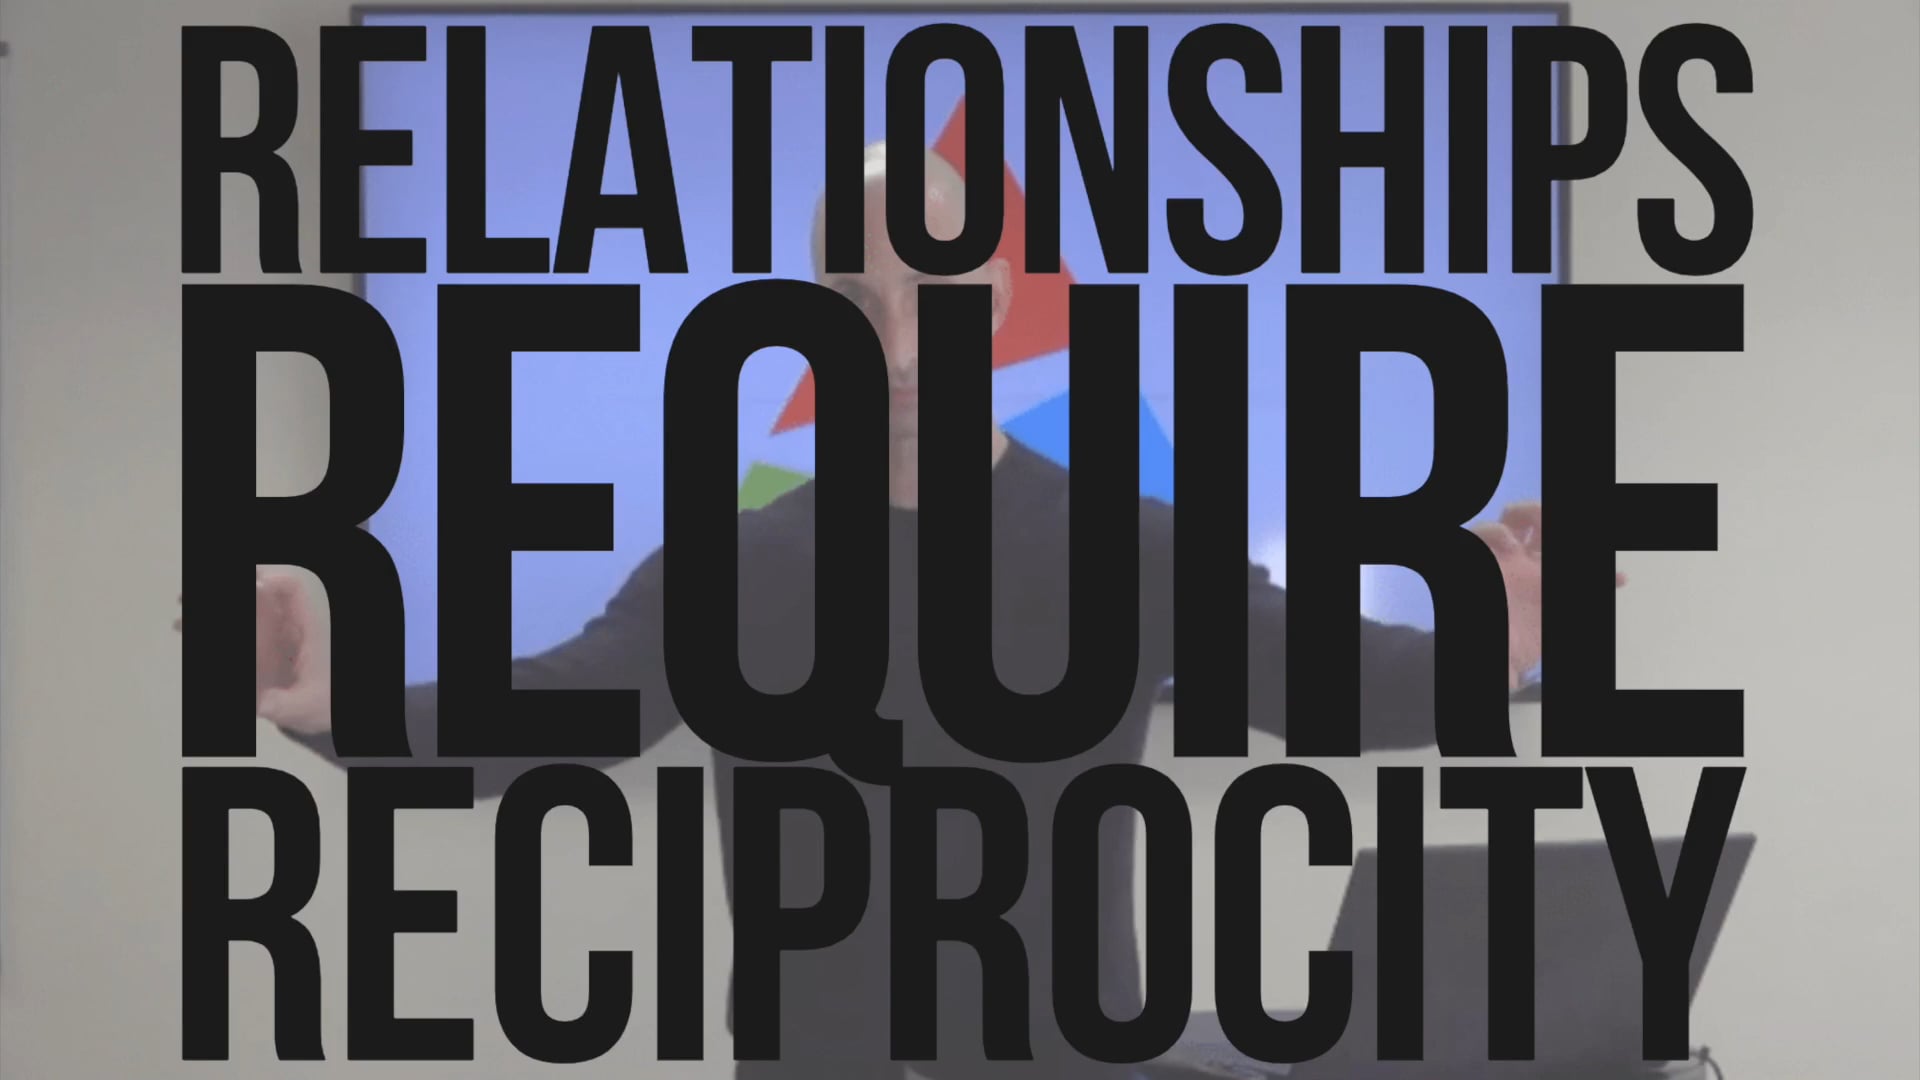 Relationships Require